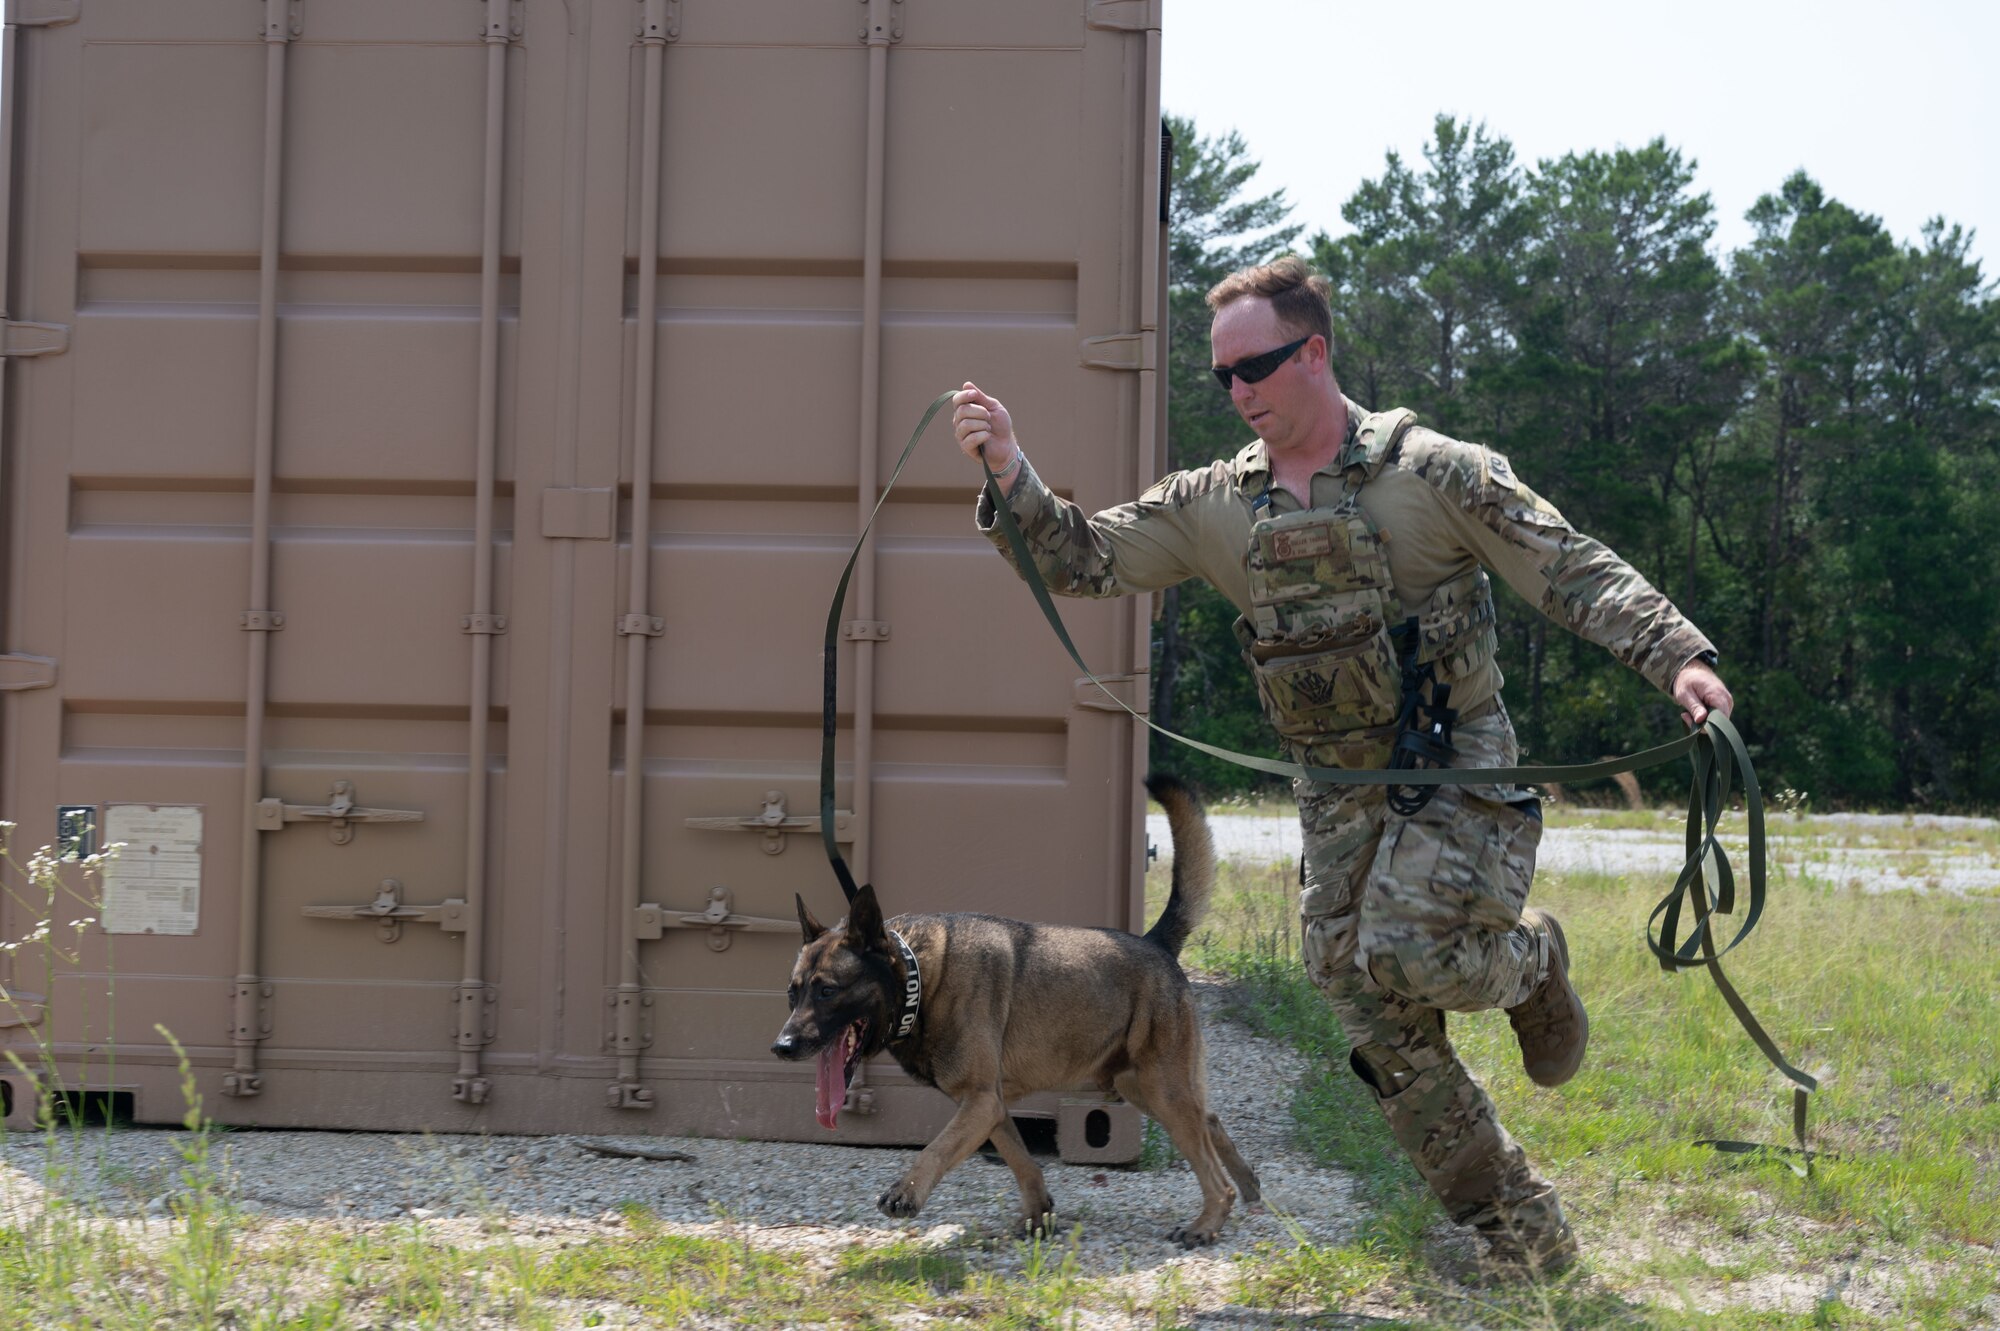 U.S. Air Force Staff Sgt. Thomas Cullen, a military working dog handler from Tyndall Air Force Base, competes in a K9 competition during National Police Week on May 18, 2022, at Eglin Air Force Base.